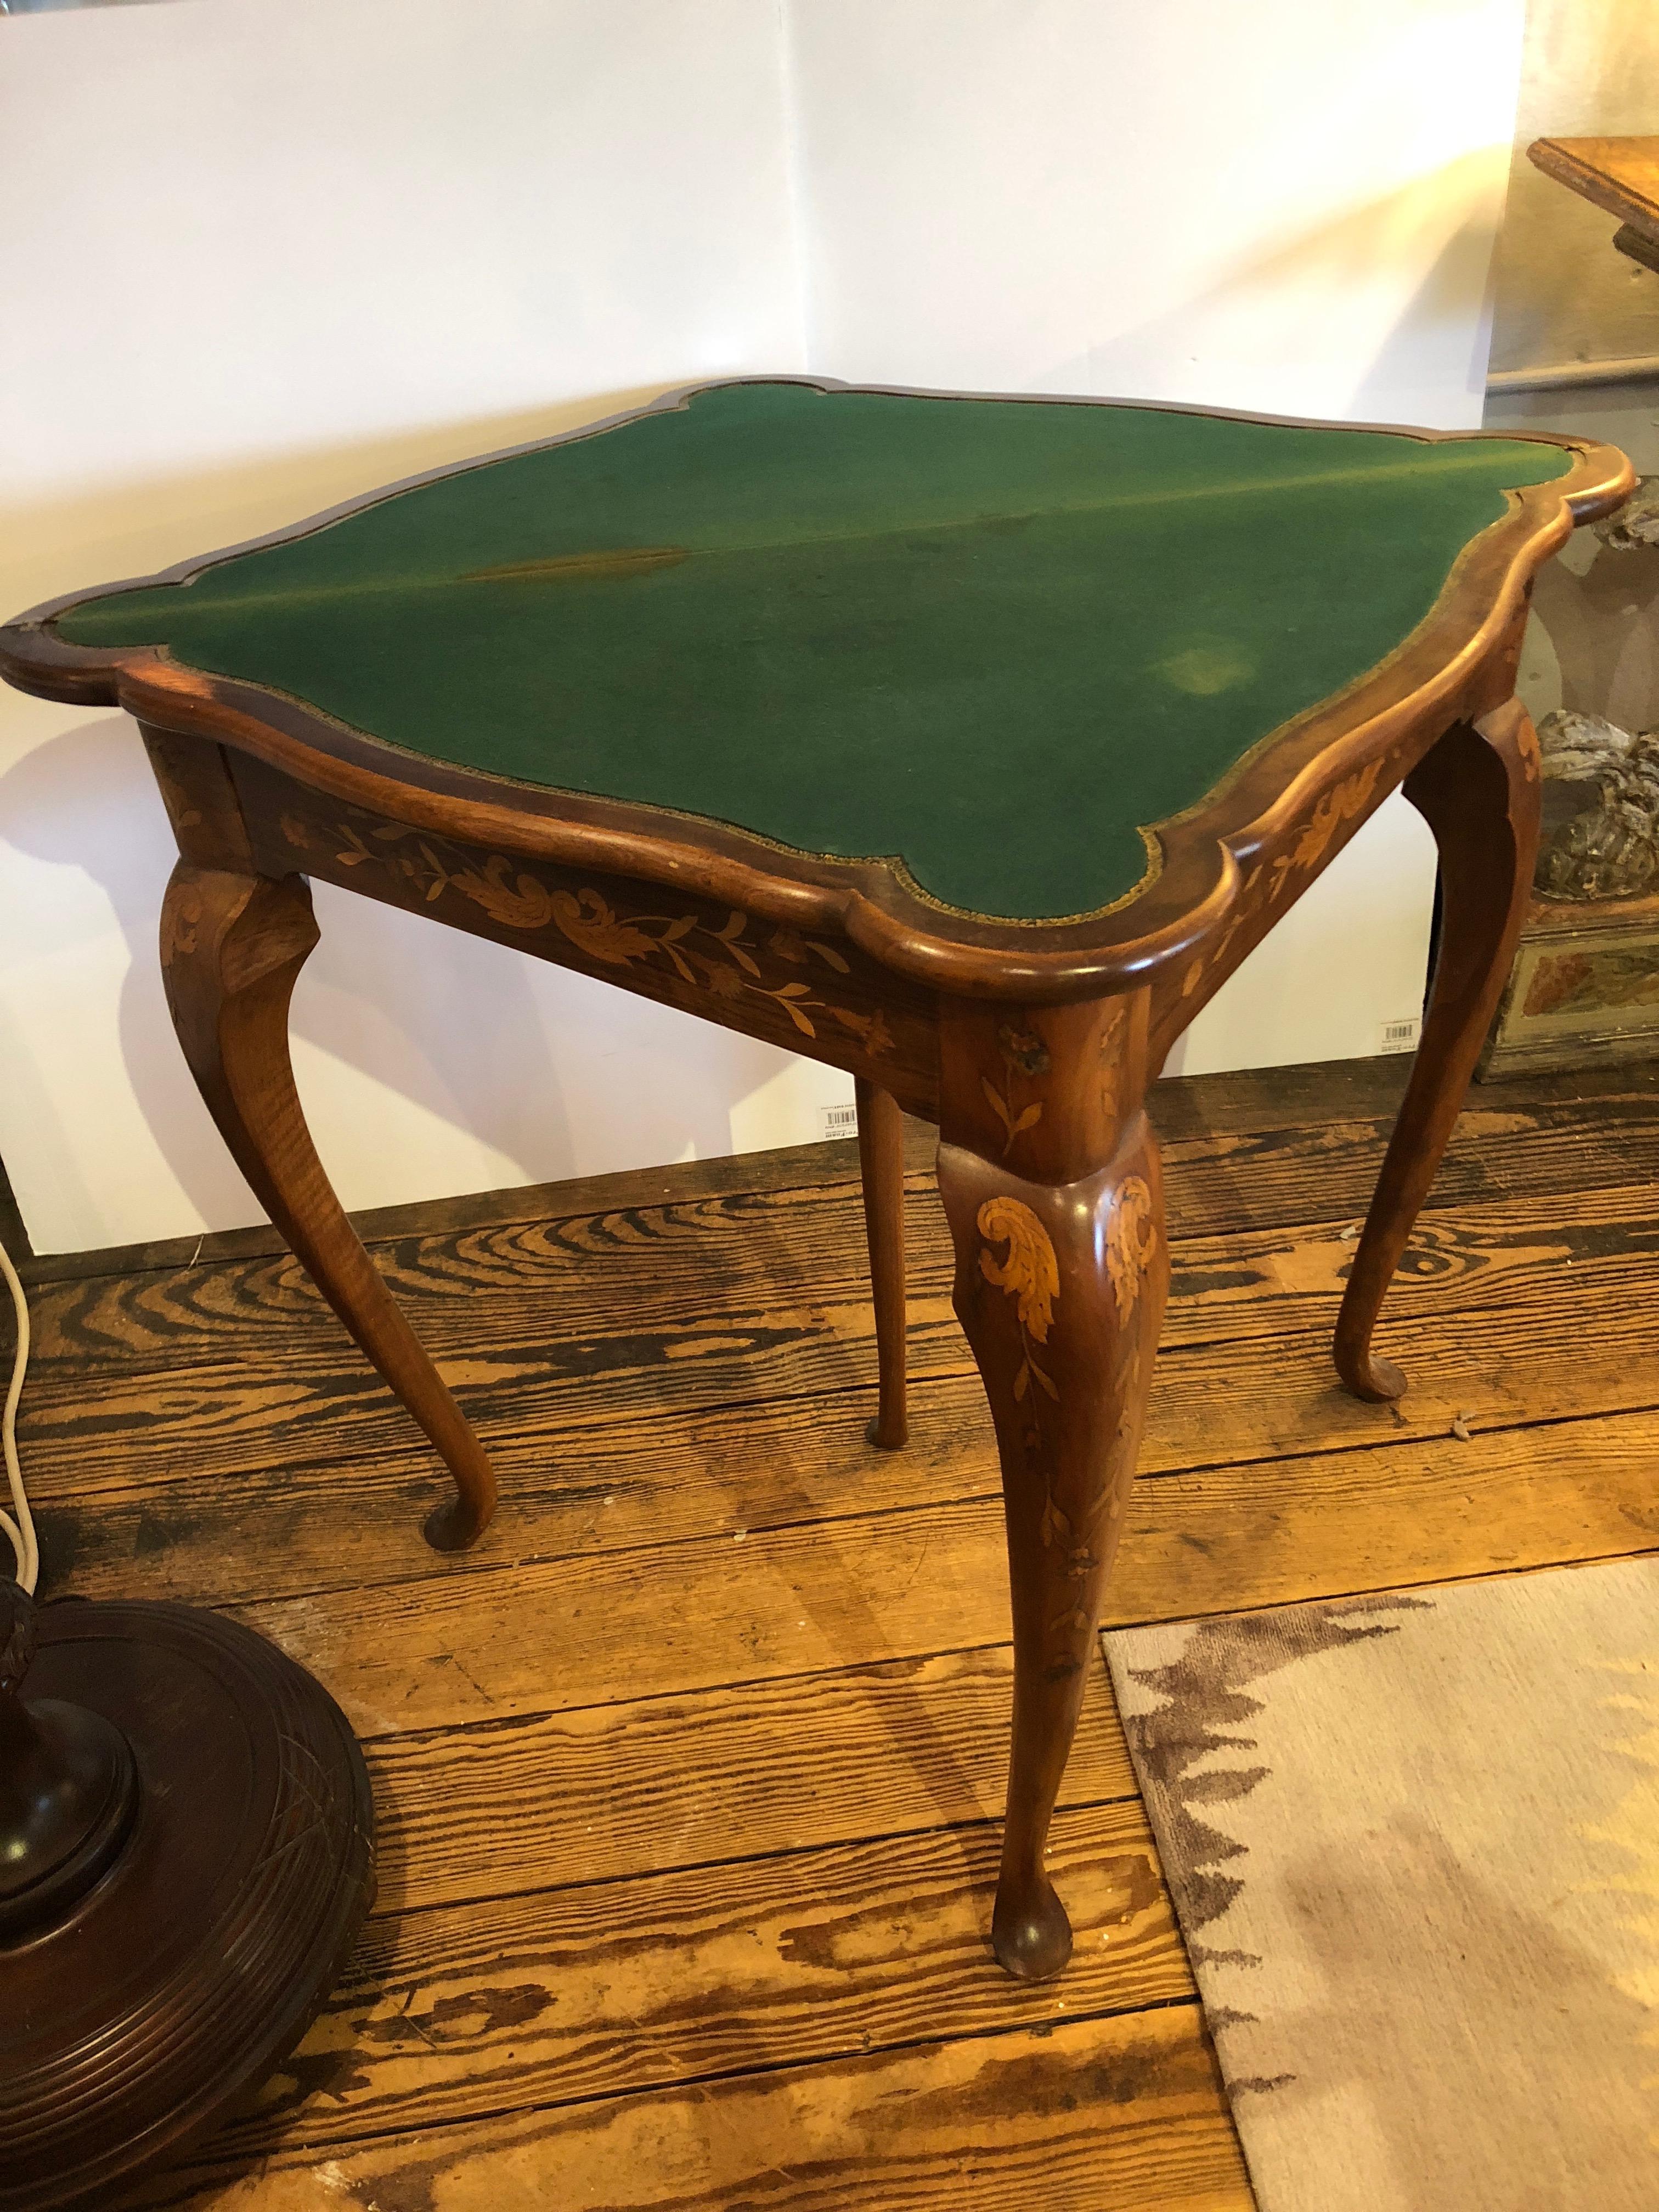 Lovely Triangular Mixed Wood Intricately Inlaid Table the Opens to Card Table 2